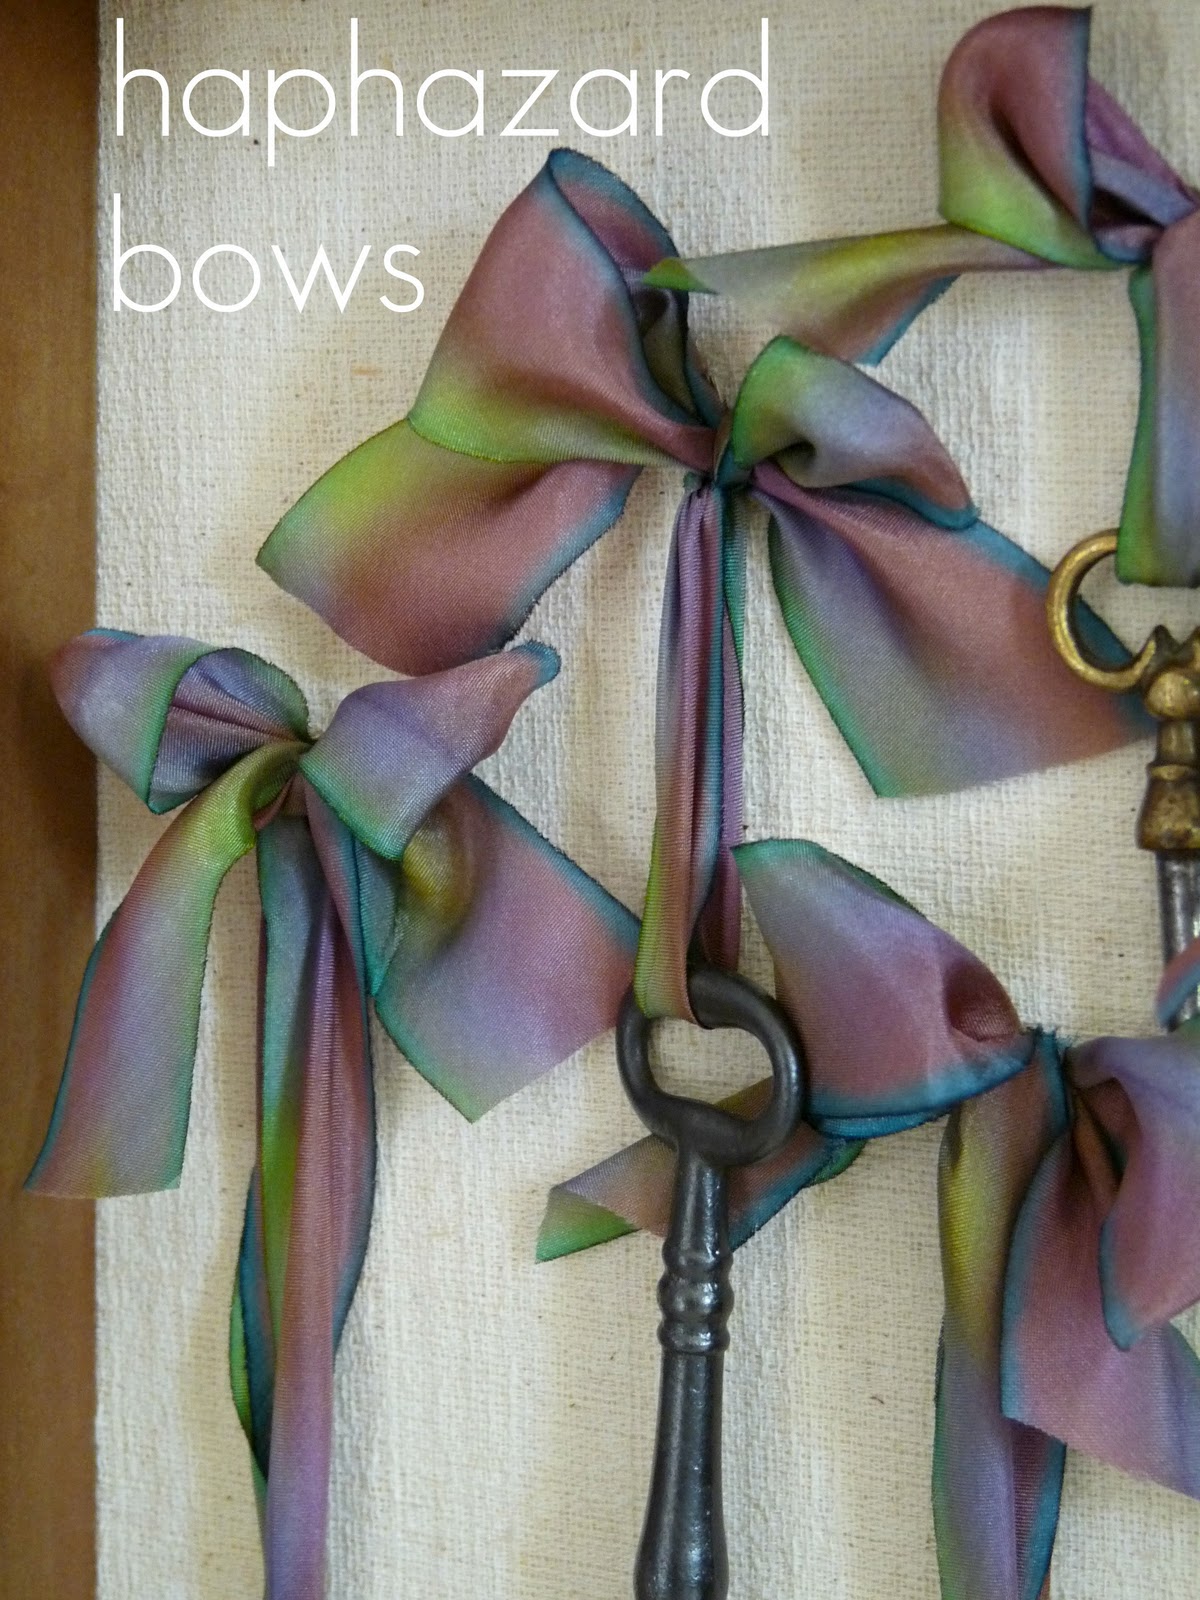 Use bows to display and hang vintage objects